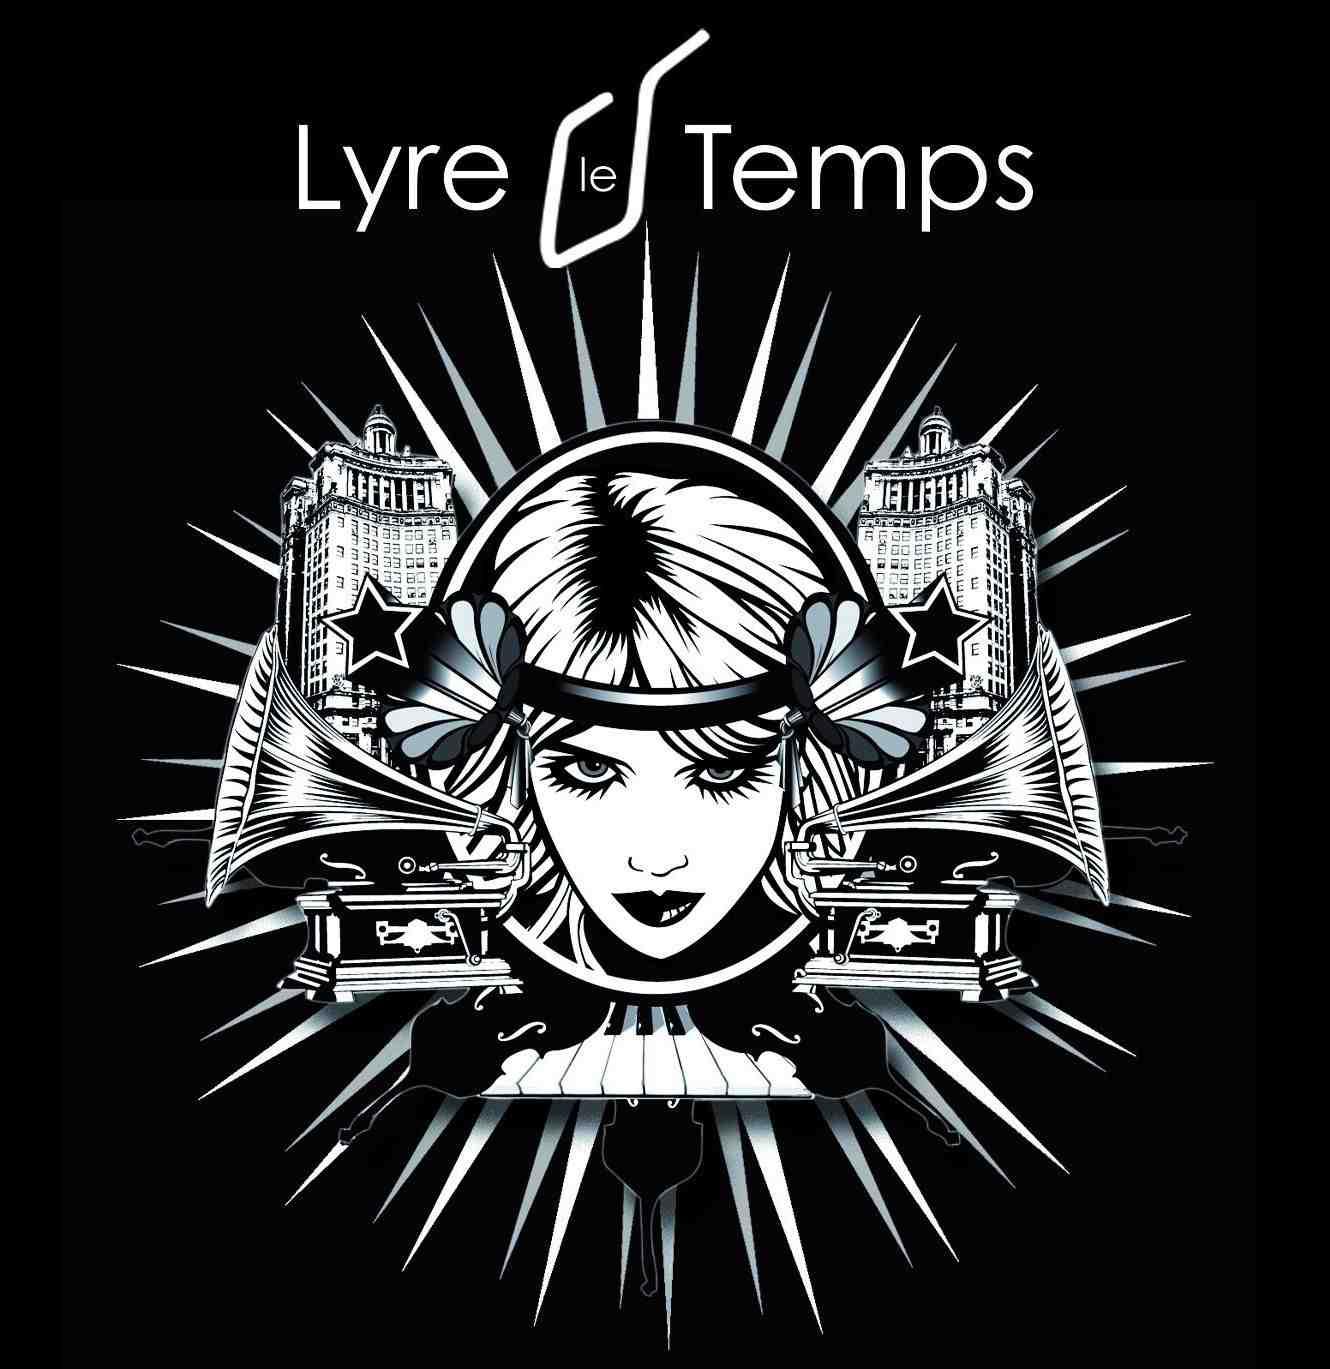 Lyre Le Temps – About The Trauma Drum